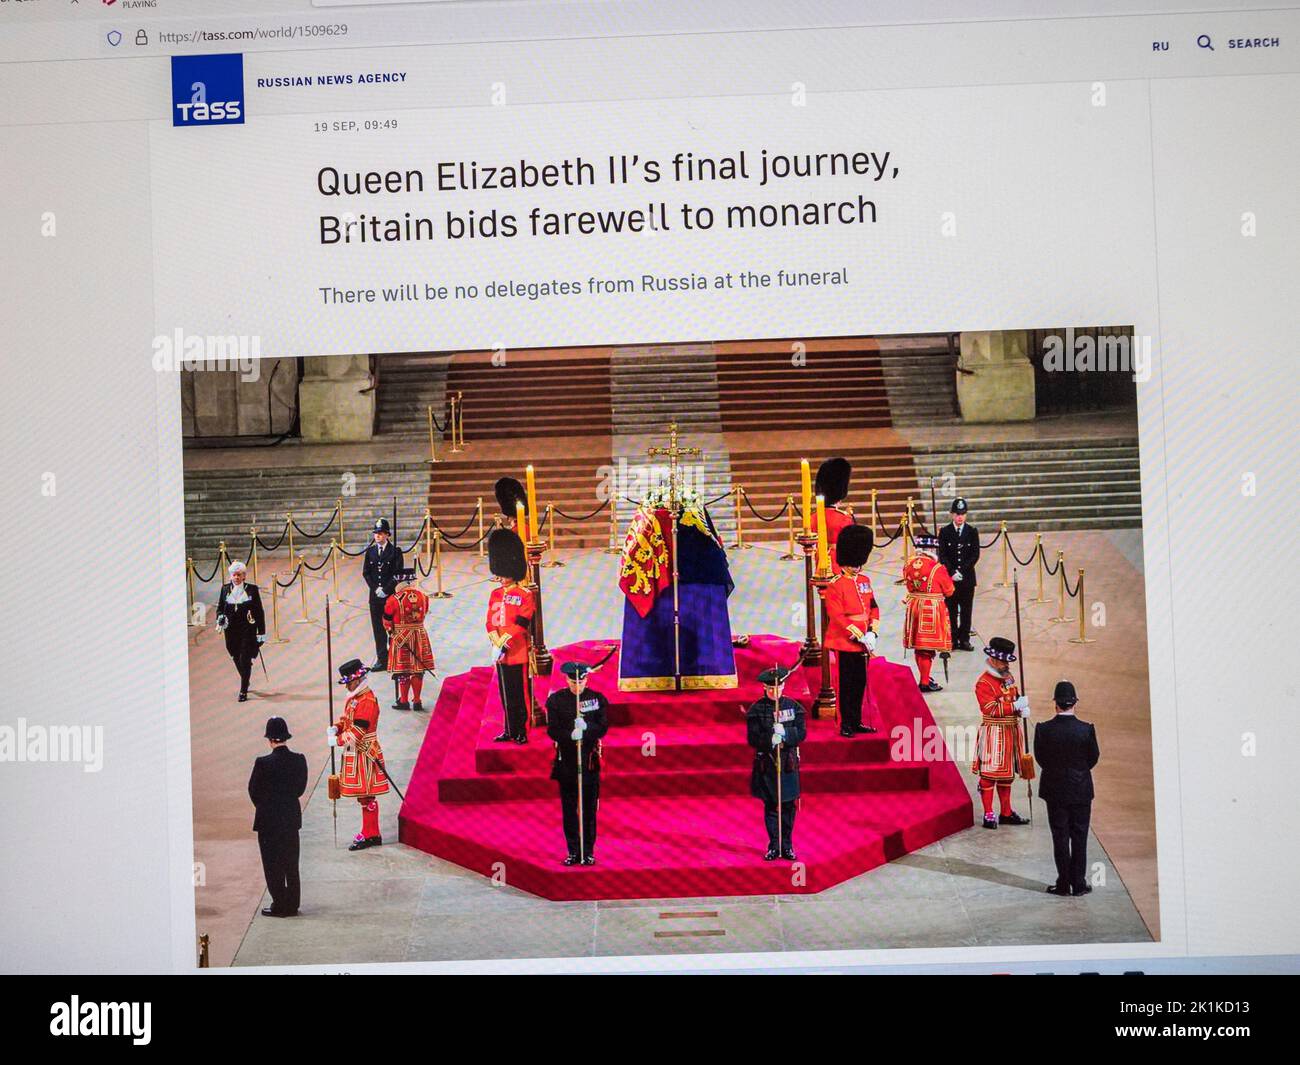 The TASS Russuian News Agency website during the funeral of Queen Elizabeth II in London on 19th September 2022. Stock Photo